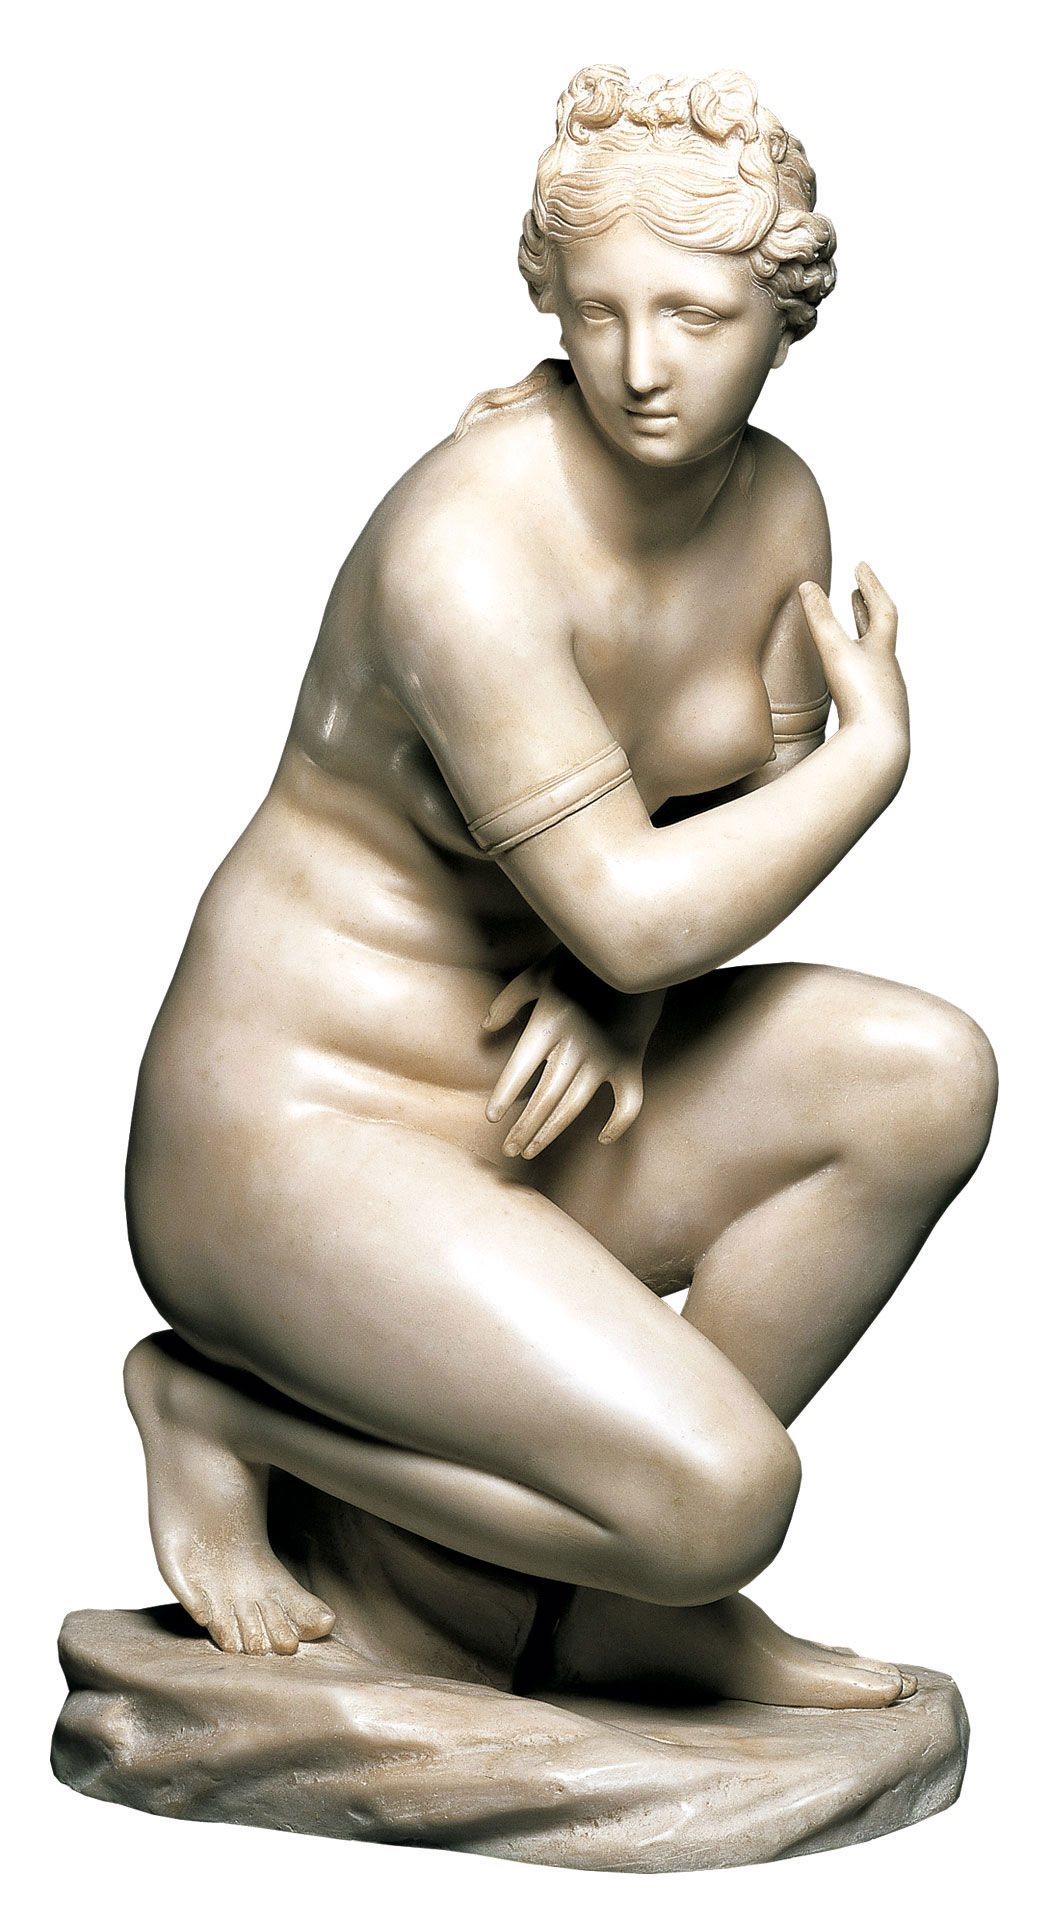 Crouching Aphrodite Venus Sculpture from Vatican Museums